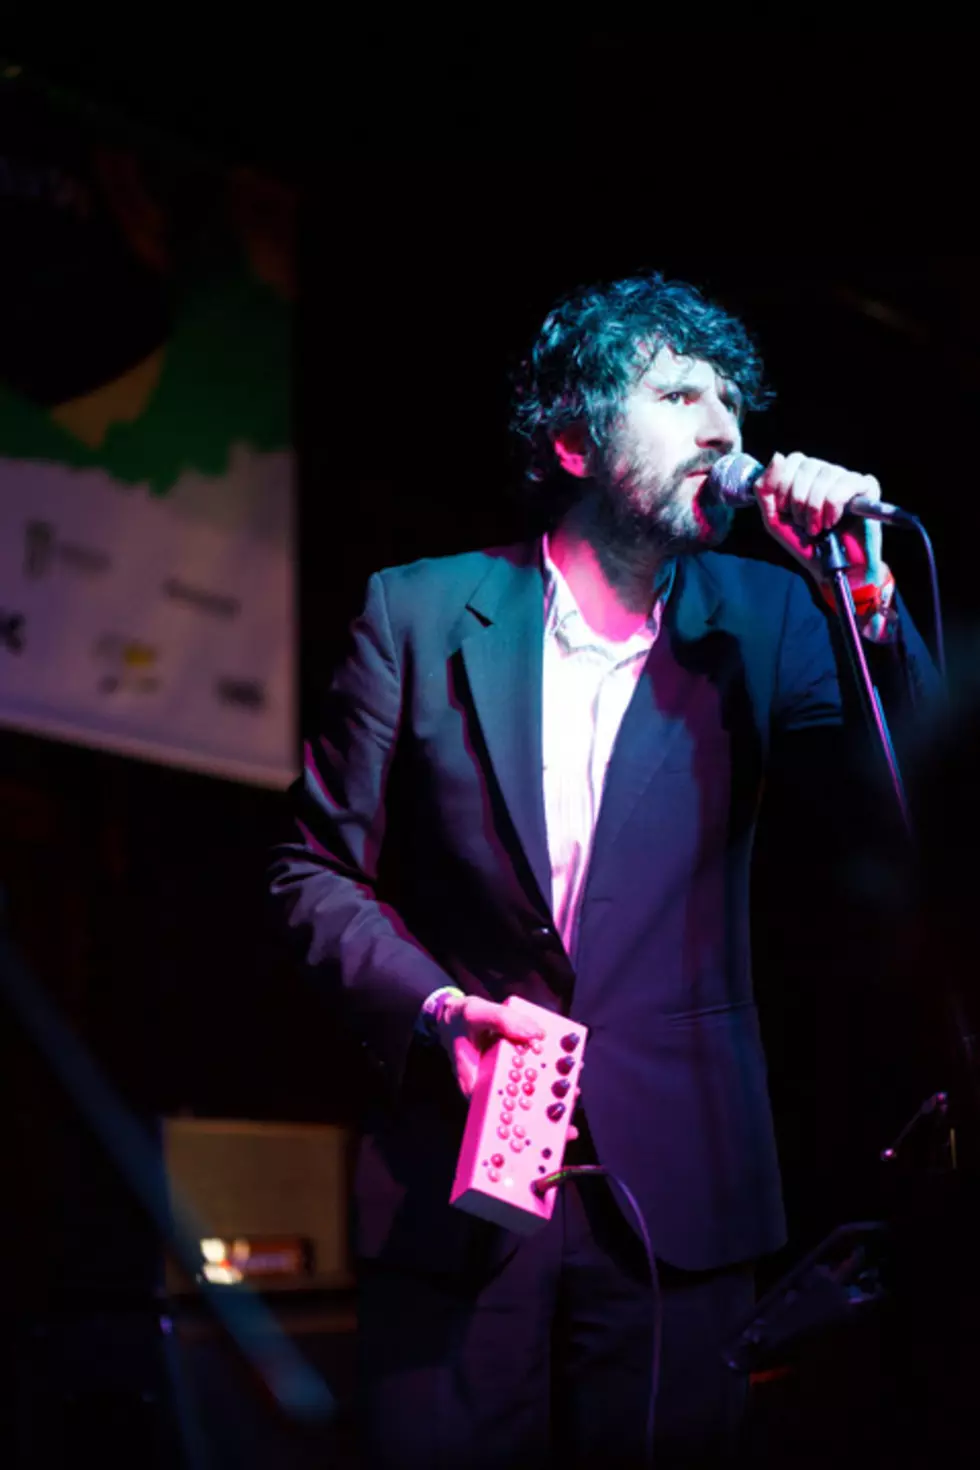 Gruff Rhys releasing &#8216;American Interior&#8217; in the US, playing Schubas on fall multimedia tour (dates, LP stream)